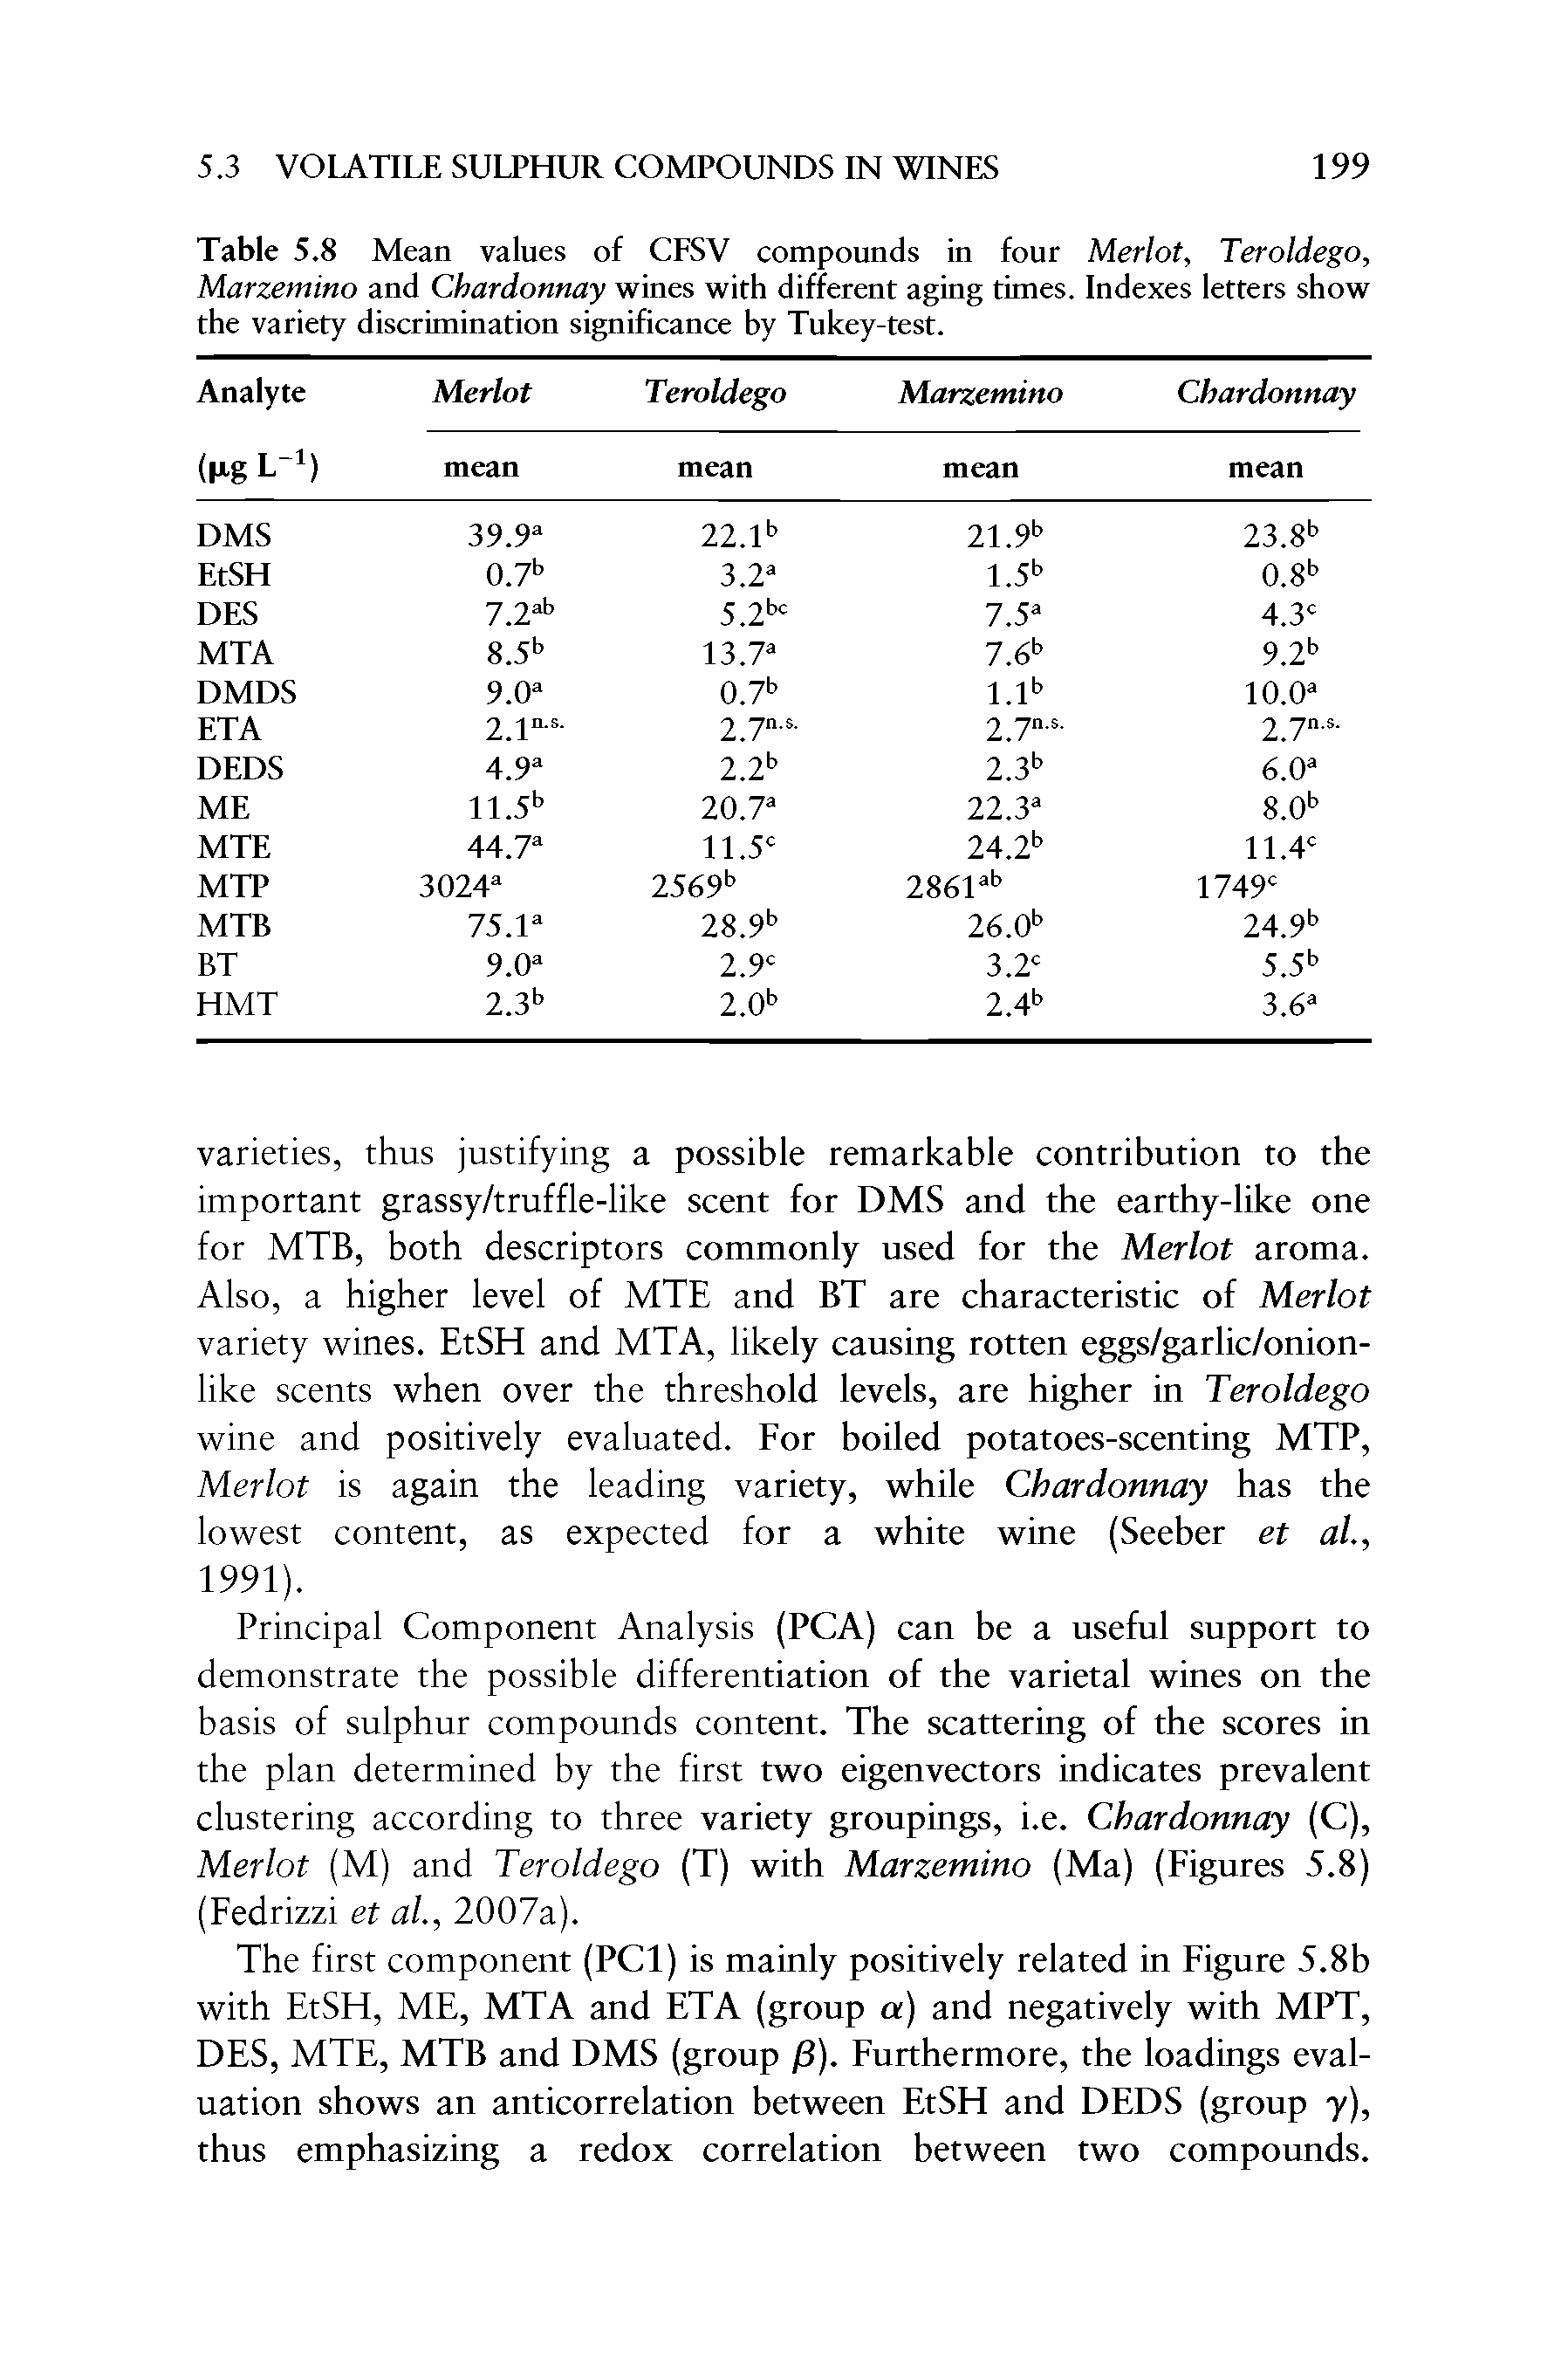 Table 5.8 Mean values of CFSV compounds in four Merlot, Teroldego, Marzemino and Chardonnay wines with different aging times. Indexes letters show the variety discrimination significance by Tukey-test.